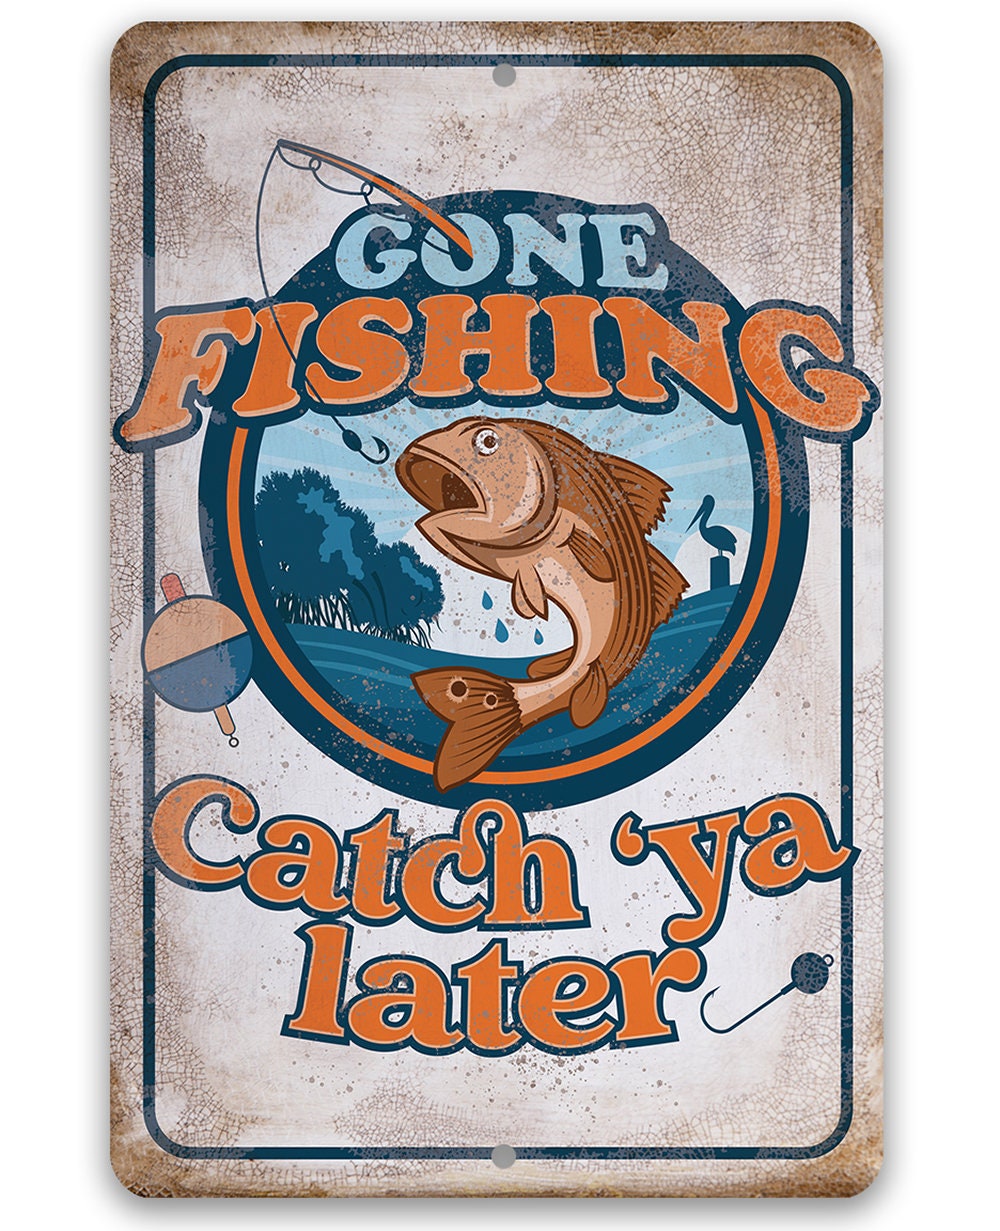 Gone Fishing Catch 'Ya Later - Metal Sign Metal Sign Lone Star Art 